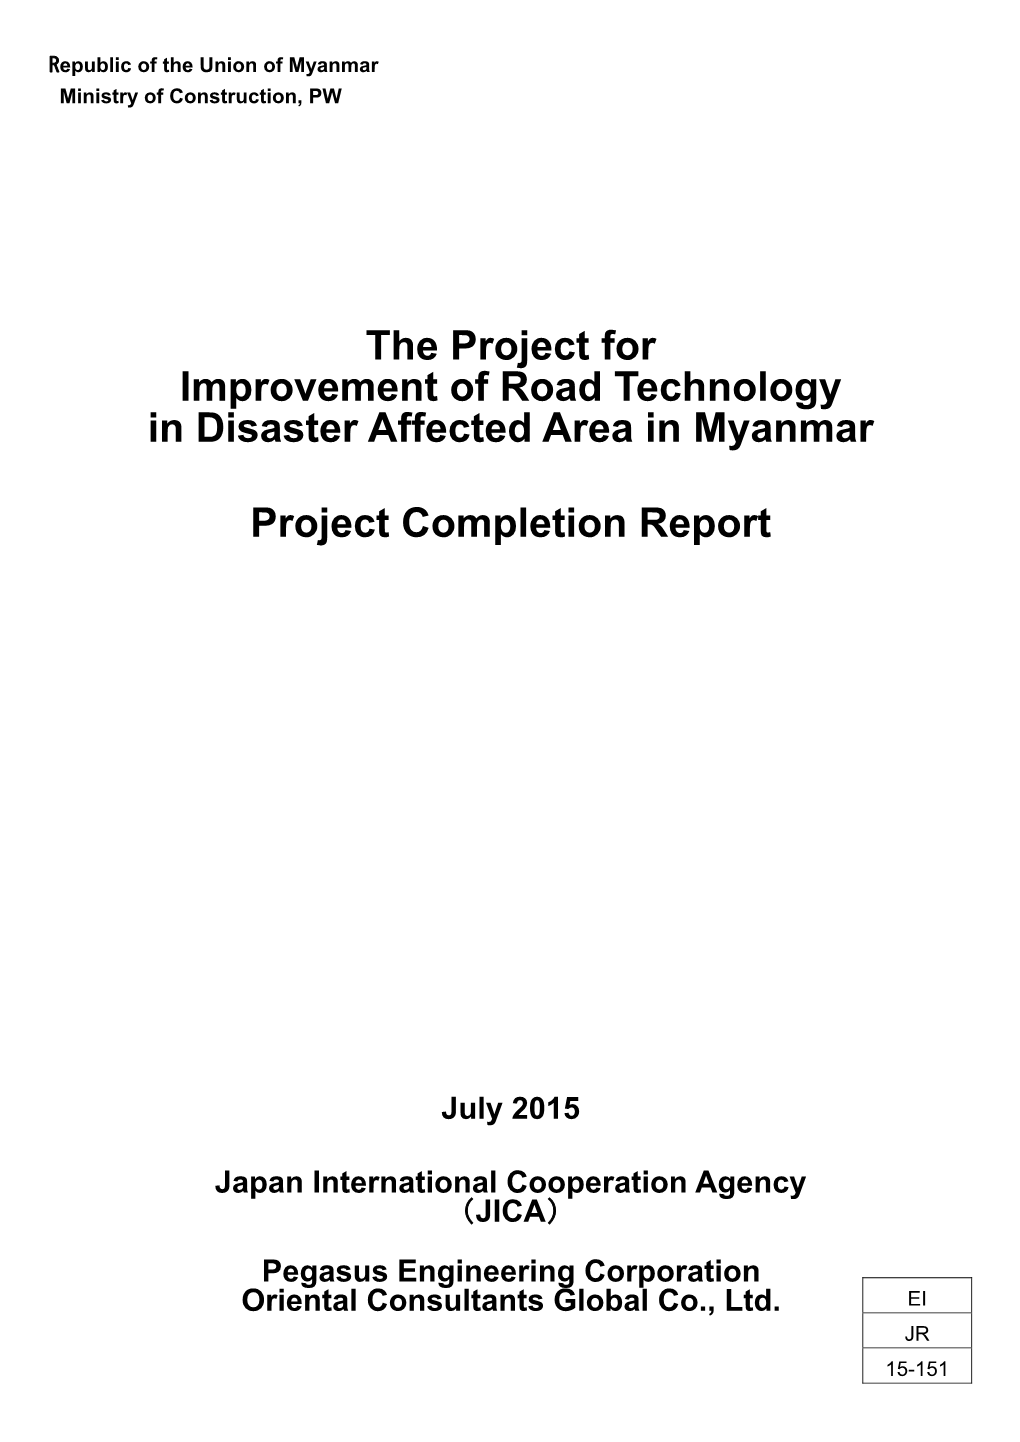 The Project for Improvement of Road Technology in Disaster Affected Area in Myanmar